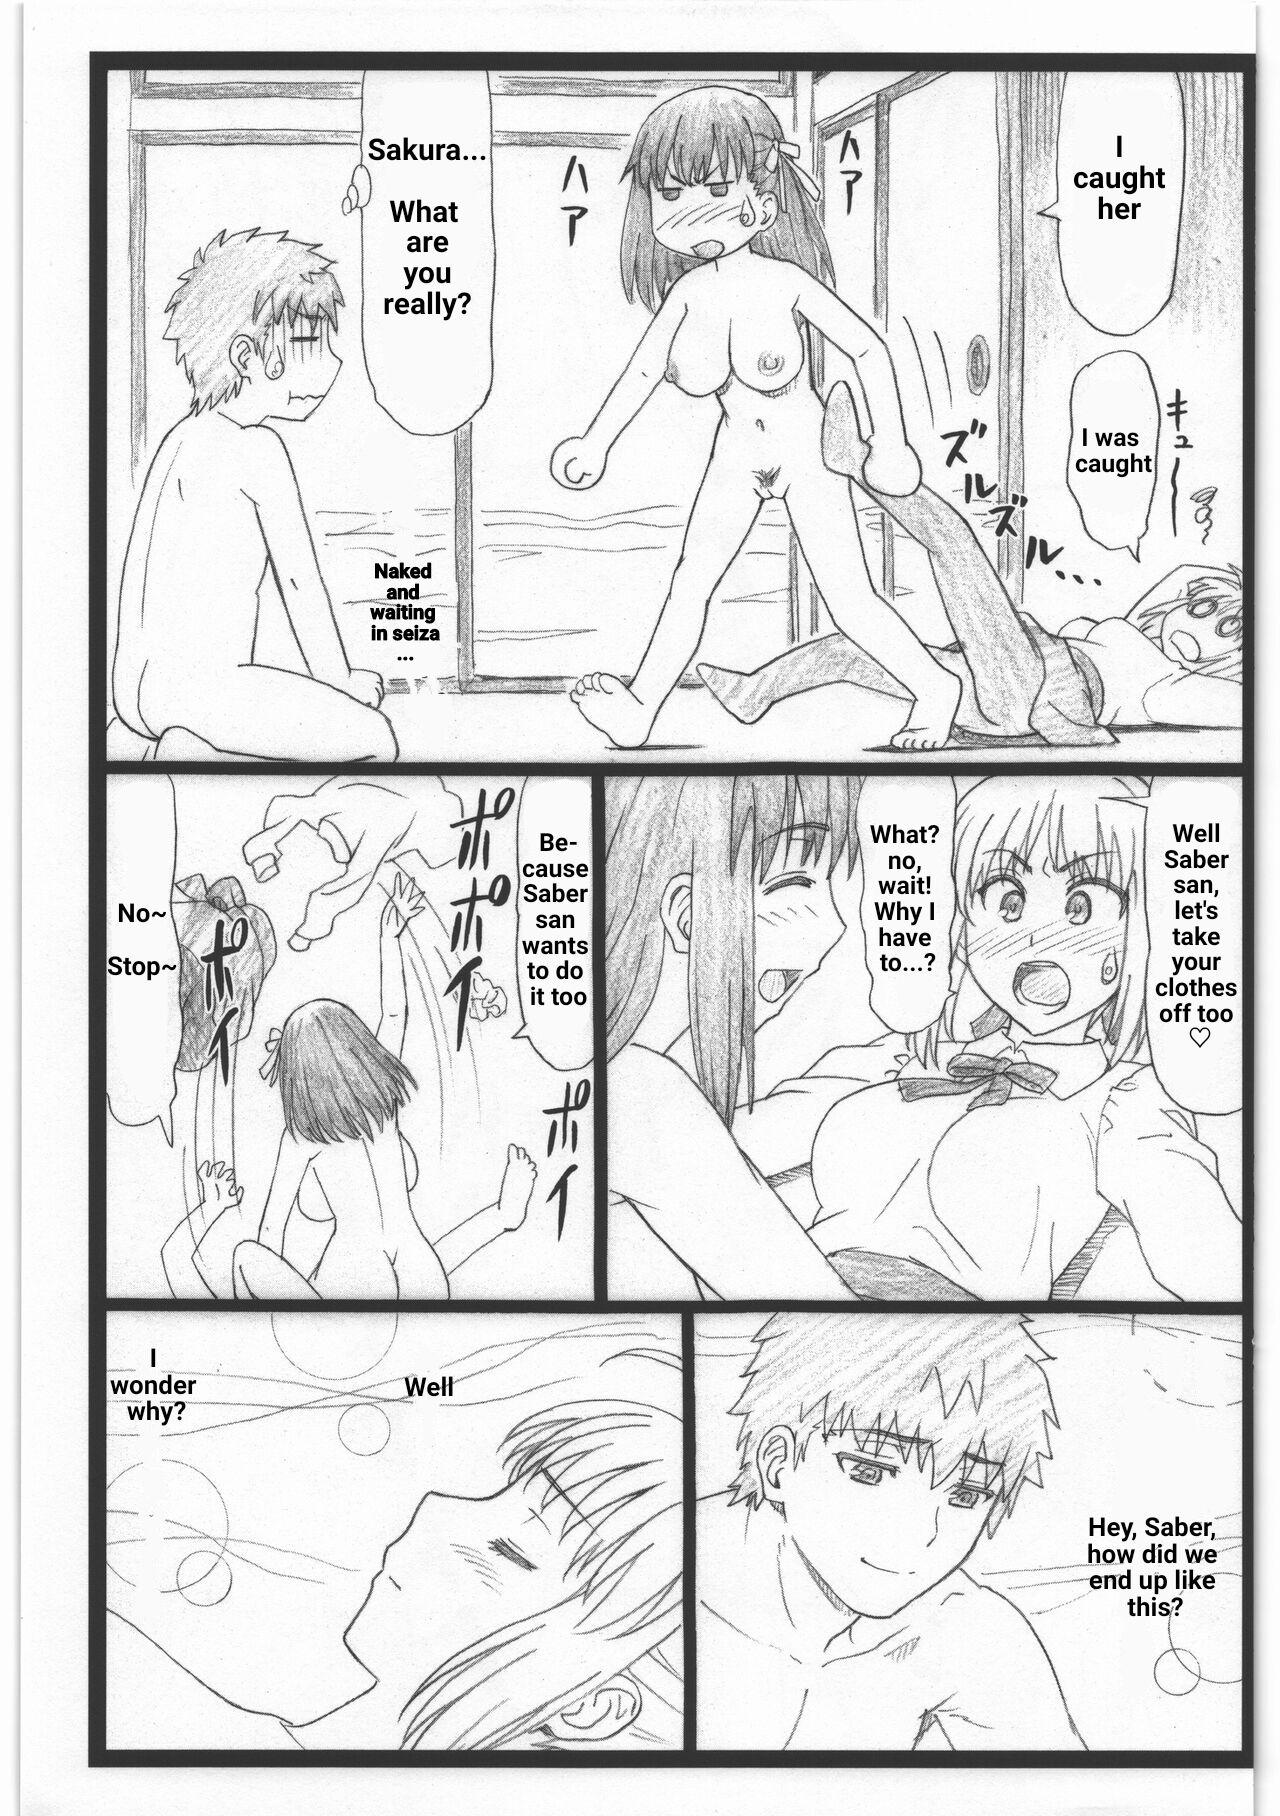 Shoes C88 Omakebon - Fate stay night Nurumassage - Page 5